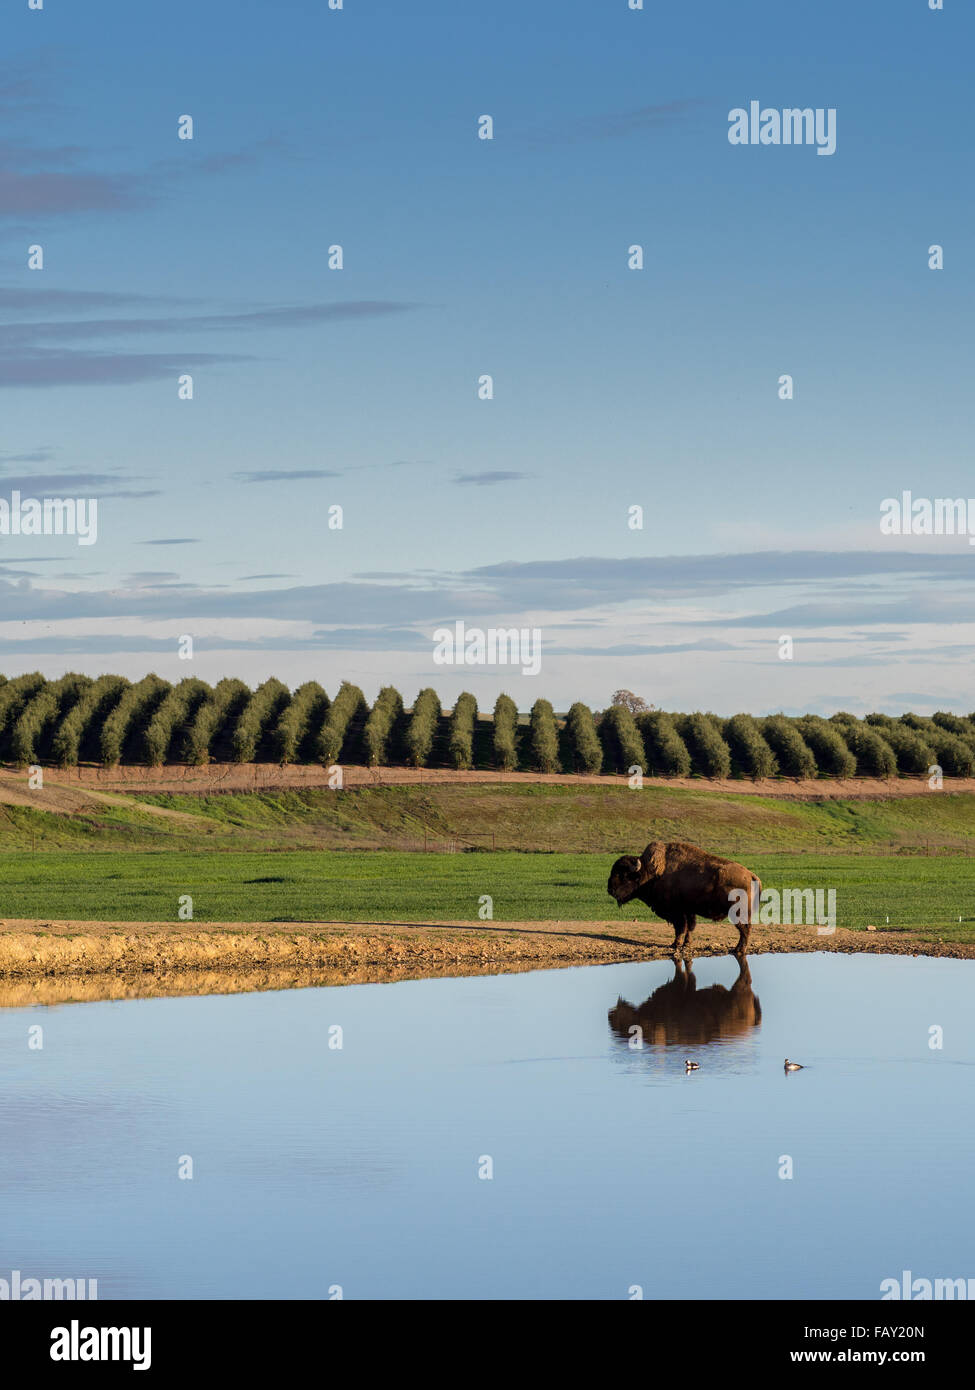 CHICO, CALIFORNIA, USA - FEBRUARY 28, 2015: Lone buffalo reflected in a pond in a rural agricultural area in Northern California Stock Photo